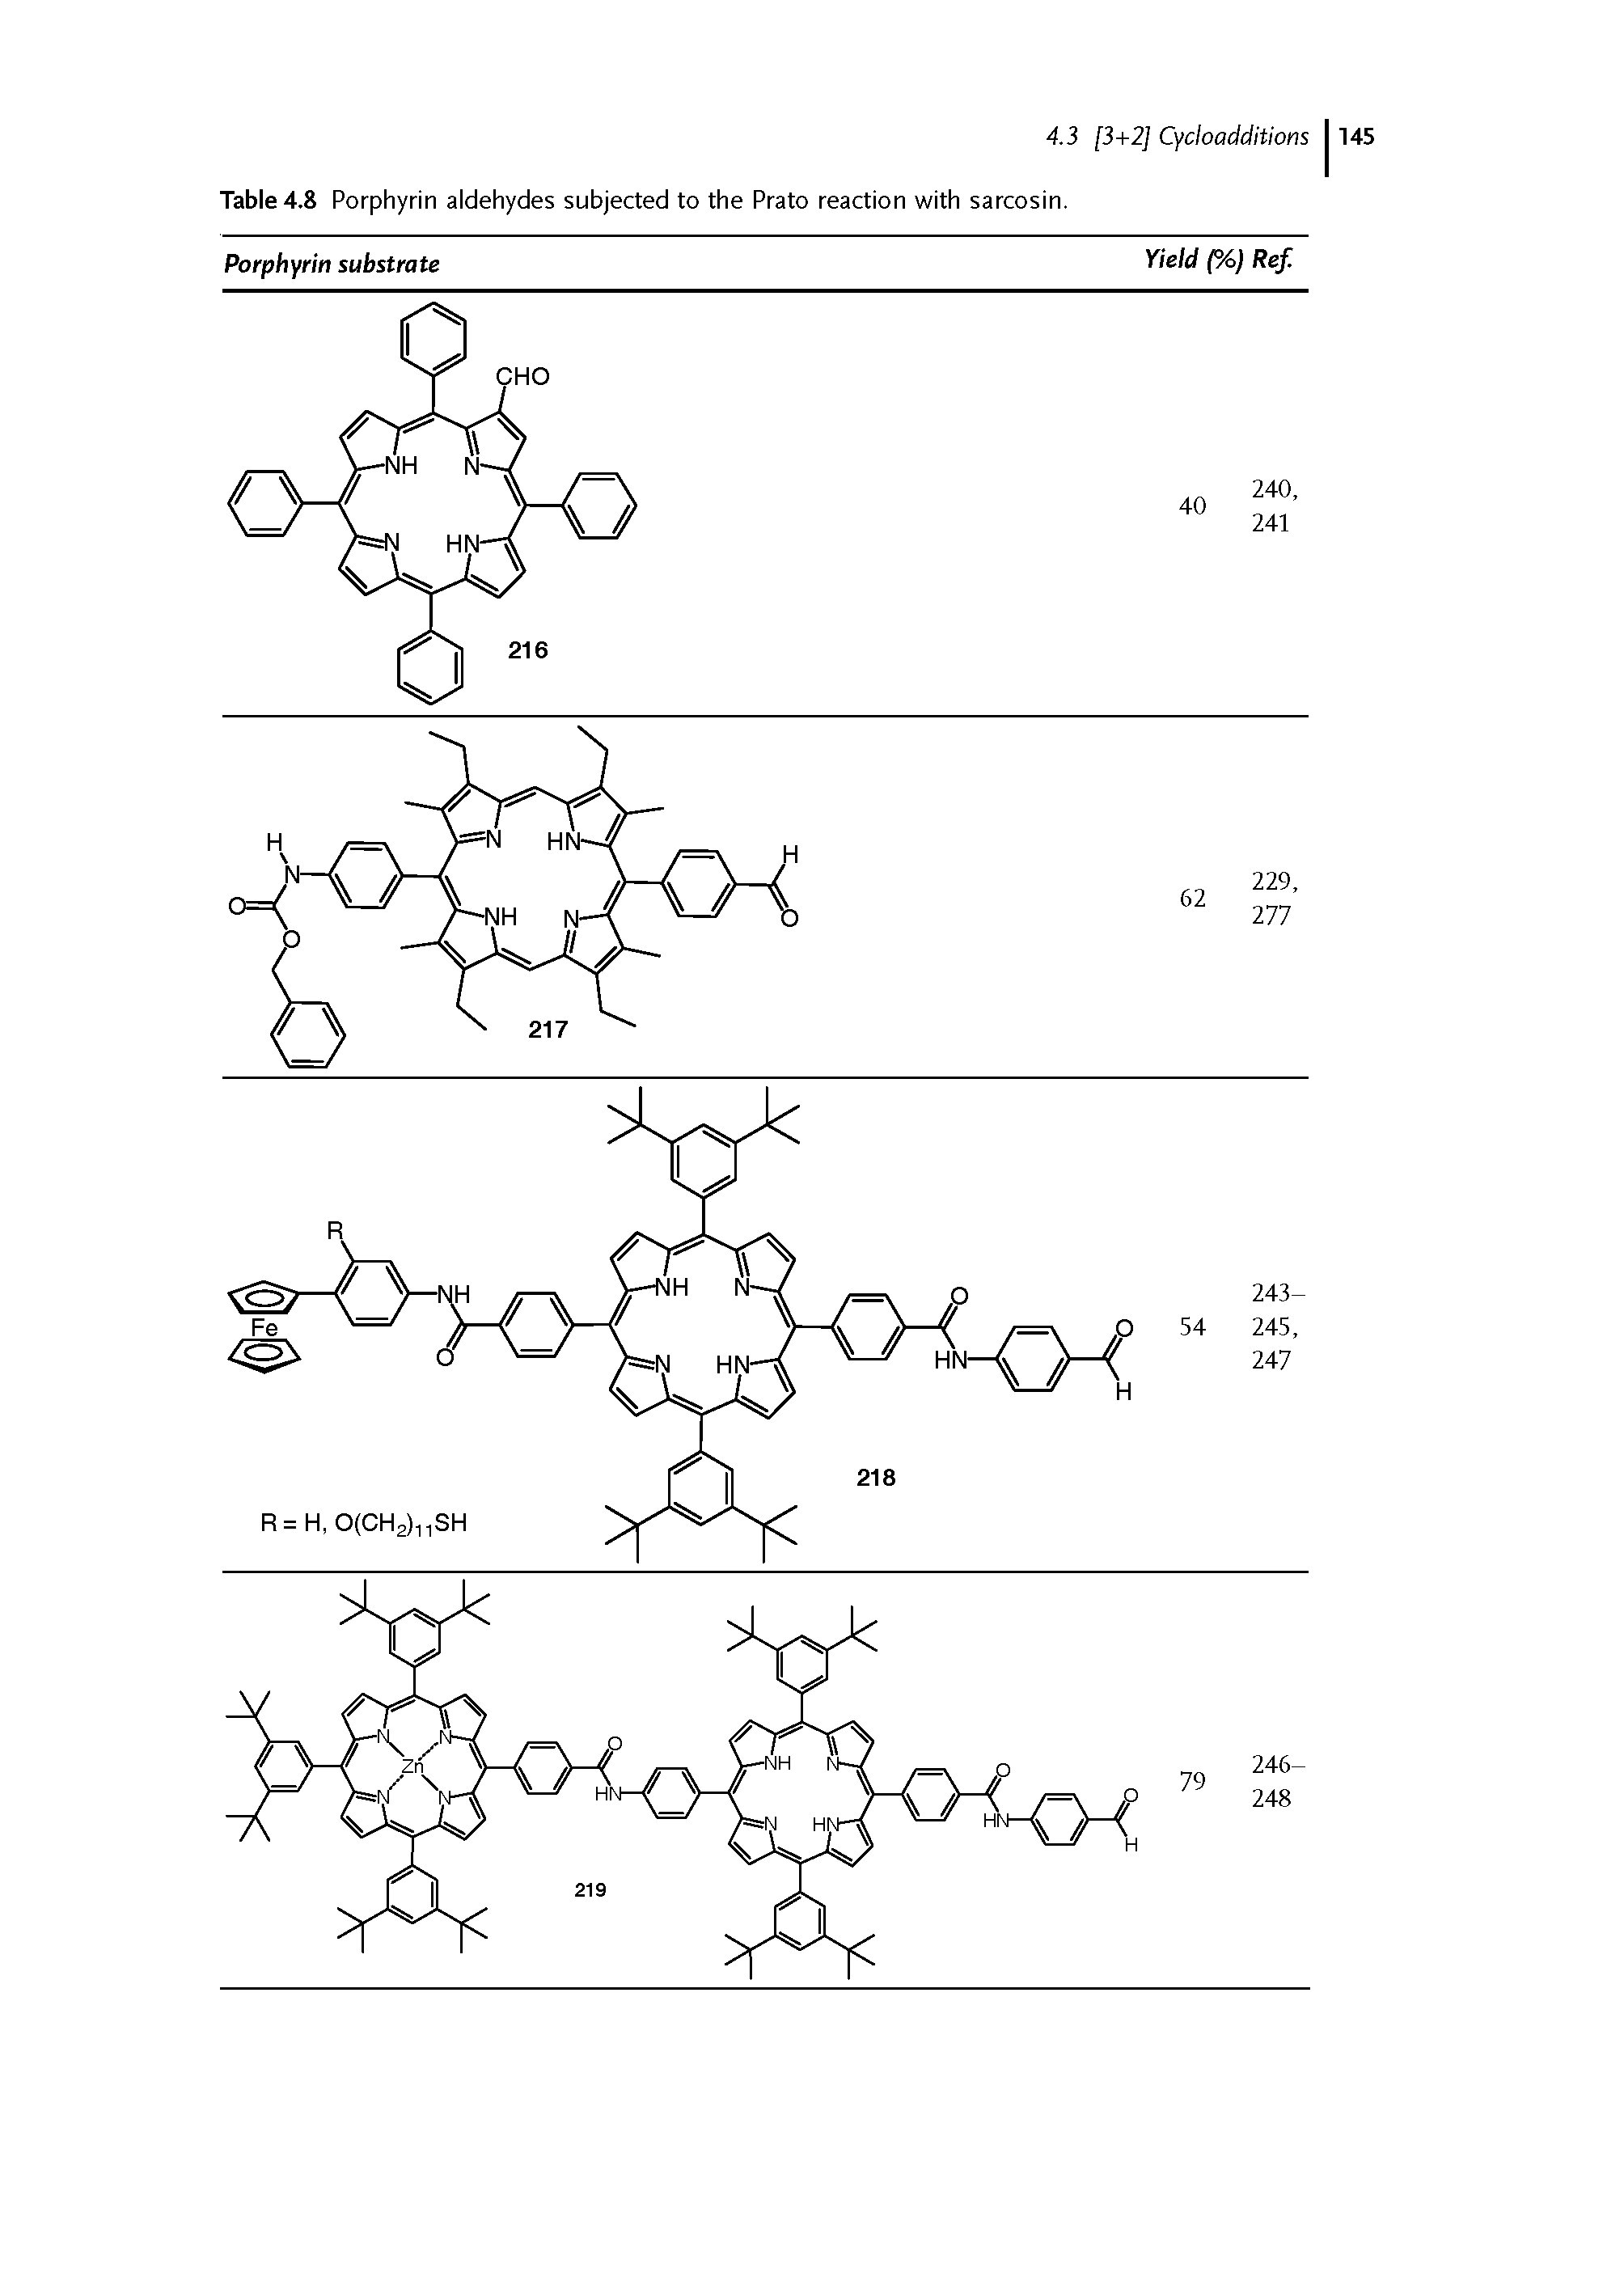 Table 4.8 Porphyrin aldehydes subjected to the Prato reaction with sarcosin.